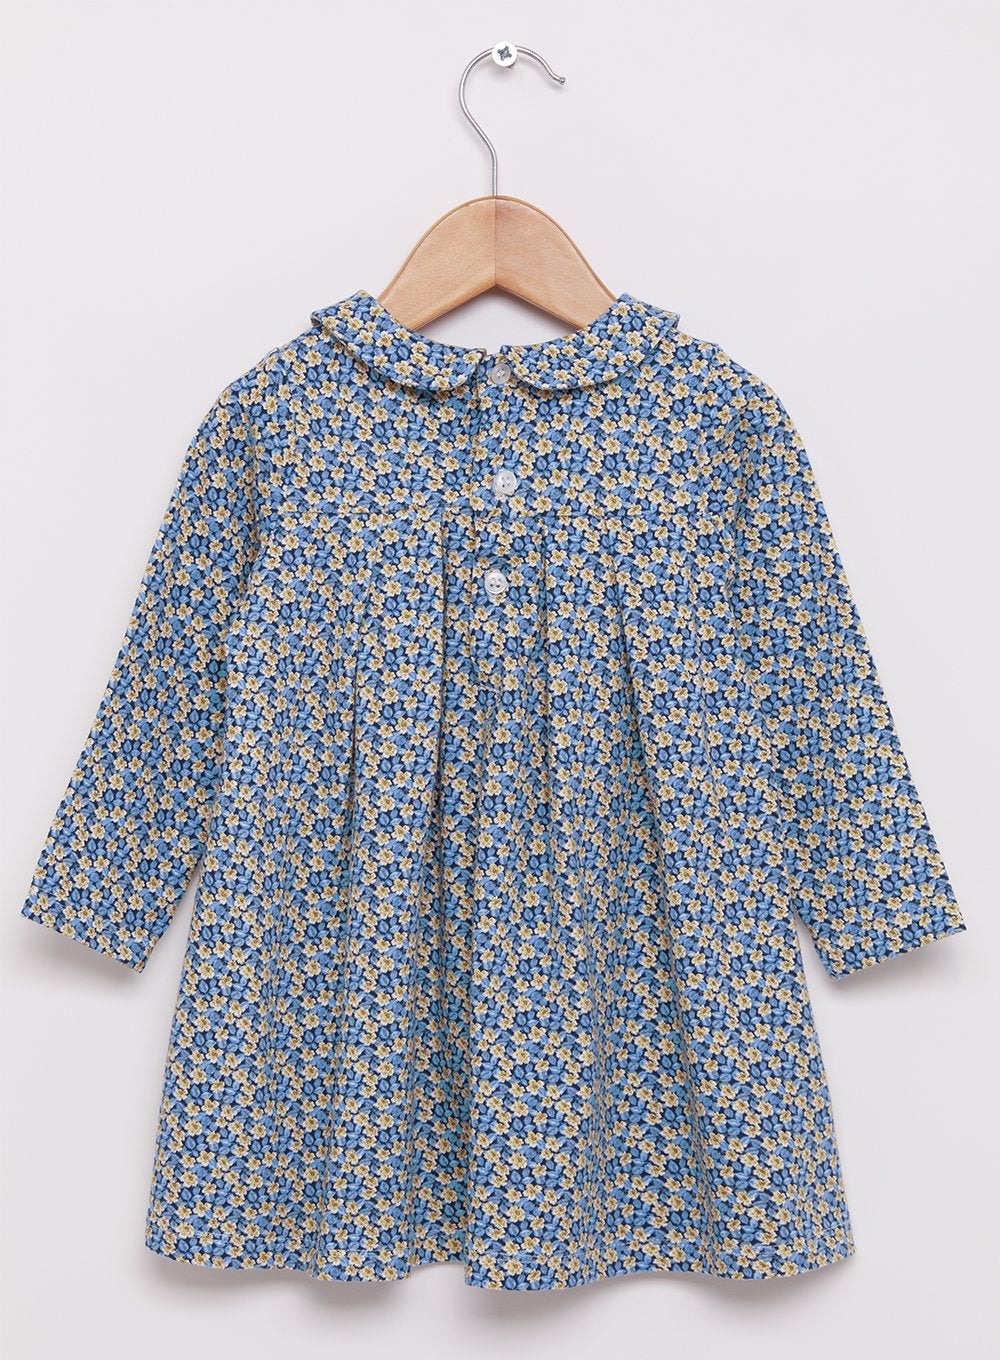 Confiture Dress Little Lucinda Jersey Dress in Navy Floral - Trotters Childrenswear